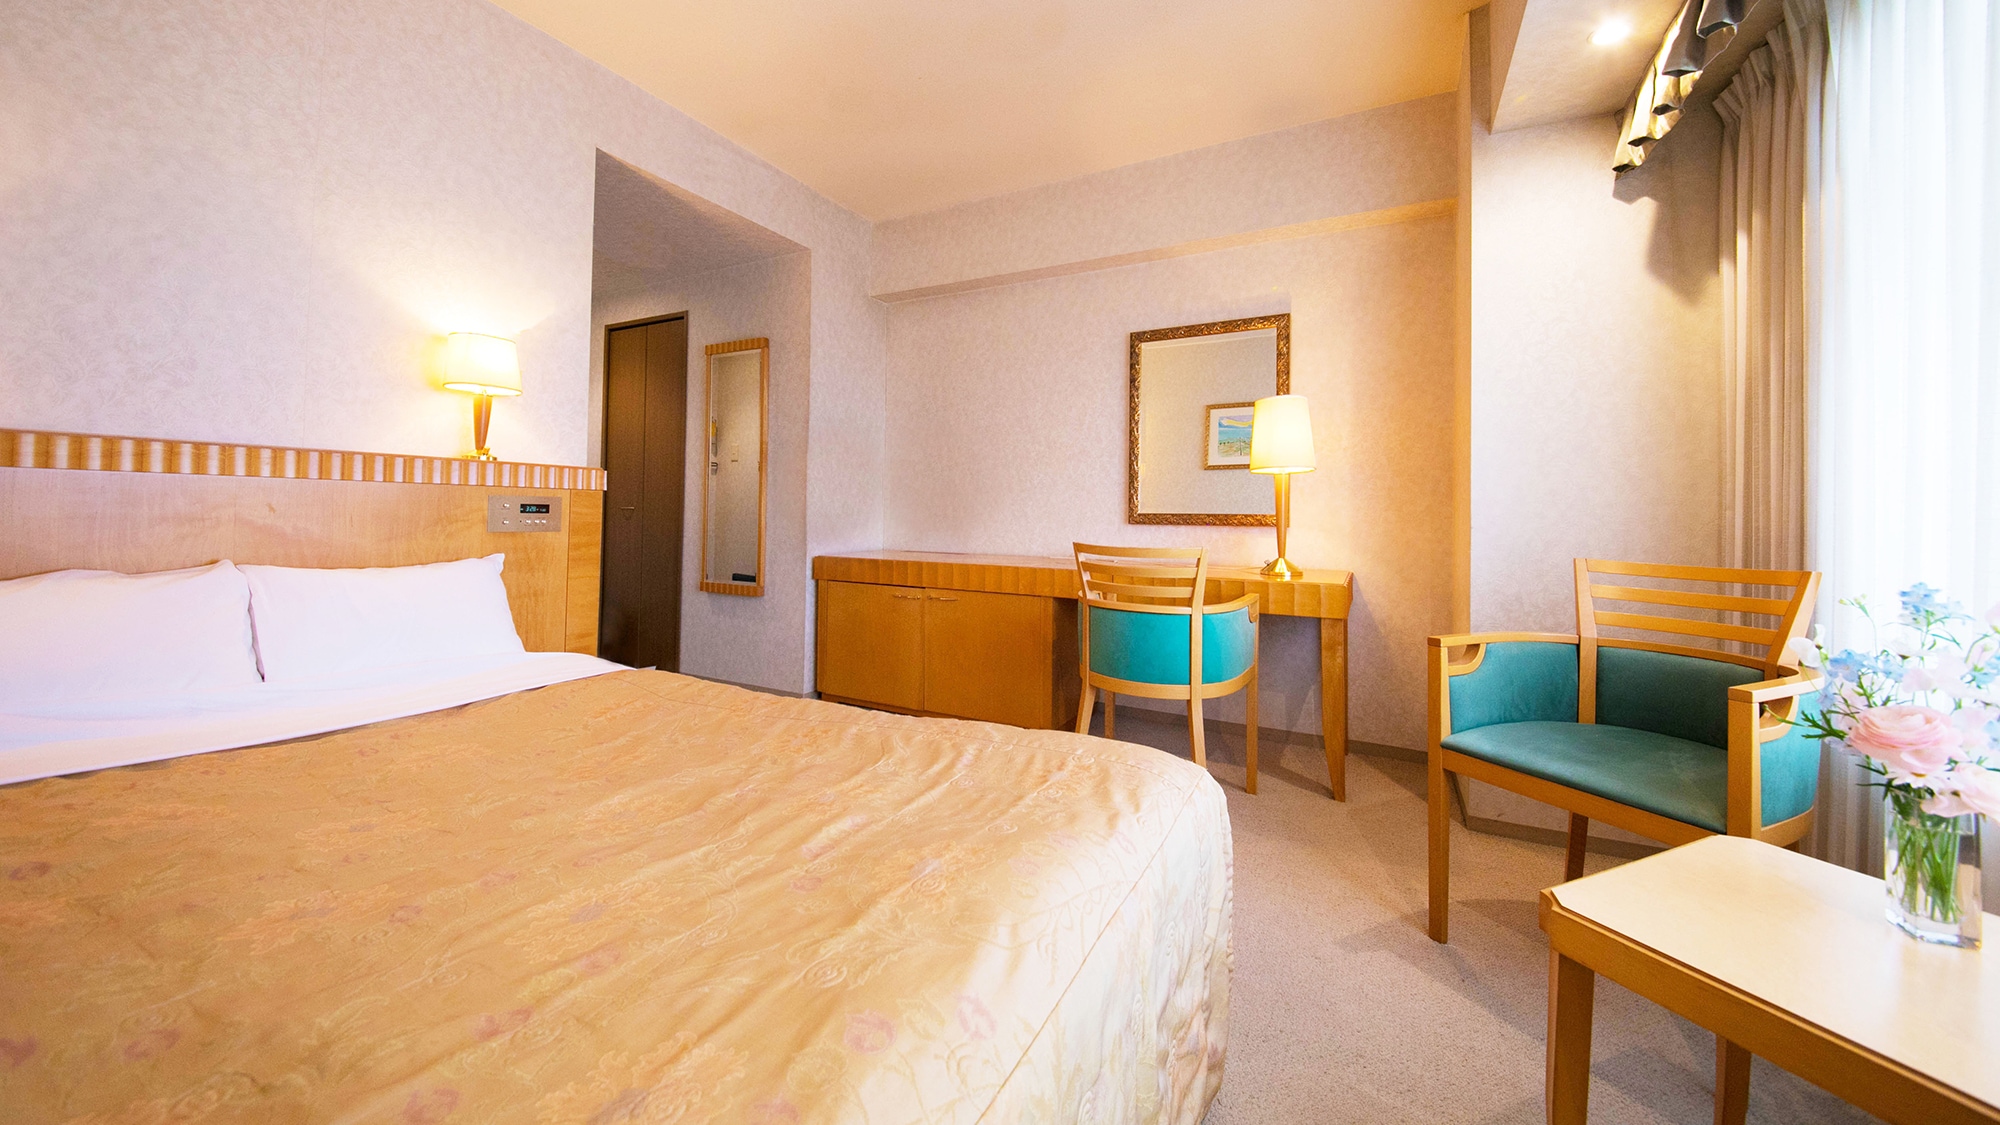 ■ Semi-double ■ 18㎡. Beds are also included ♪ Comfortable space recommended for close couples